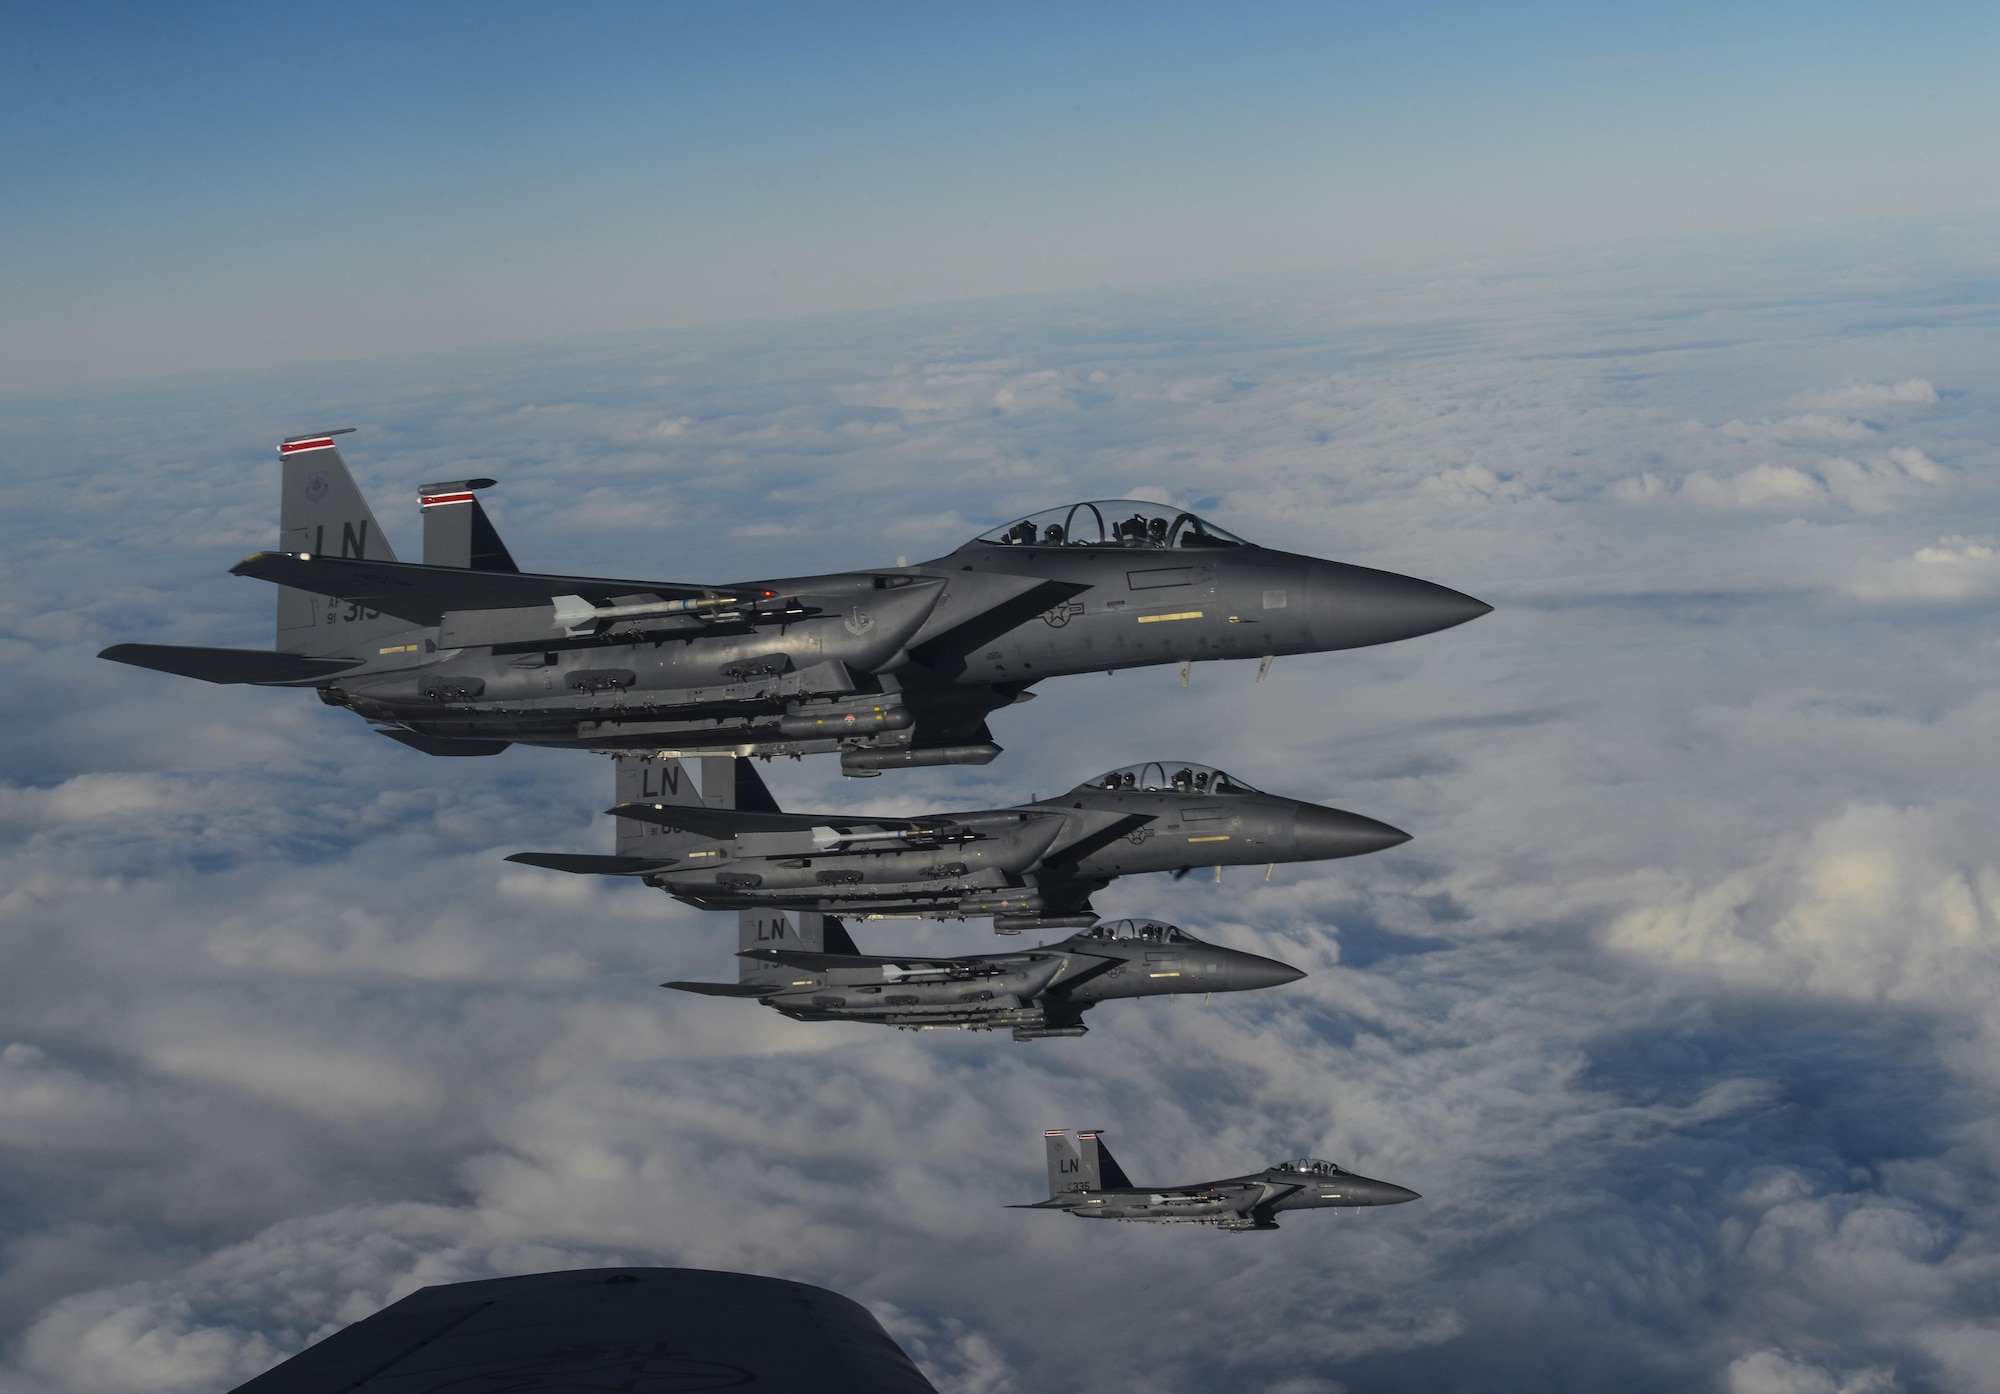 U.S. Air Force F-15D Eagles assigned to the 48th Fighter Wing from RAF Lakenheath, England, fly in formation off of the wing of a KC-135 Stratotanker assigned to the 349th Air Mobility Wing from Beale Air Force Base, Calif., Dec. 2, 2016, over the Atlantic Ocean. The F-15 Eagle is an all weather, extremely maneuverable tactical fighter designed to permit the Air Force to gain and maintain air supremacy over the battlefield. (U.S. Air Force photo by Staff Sgt. Micaiah Anthony)